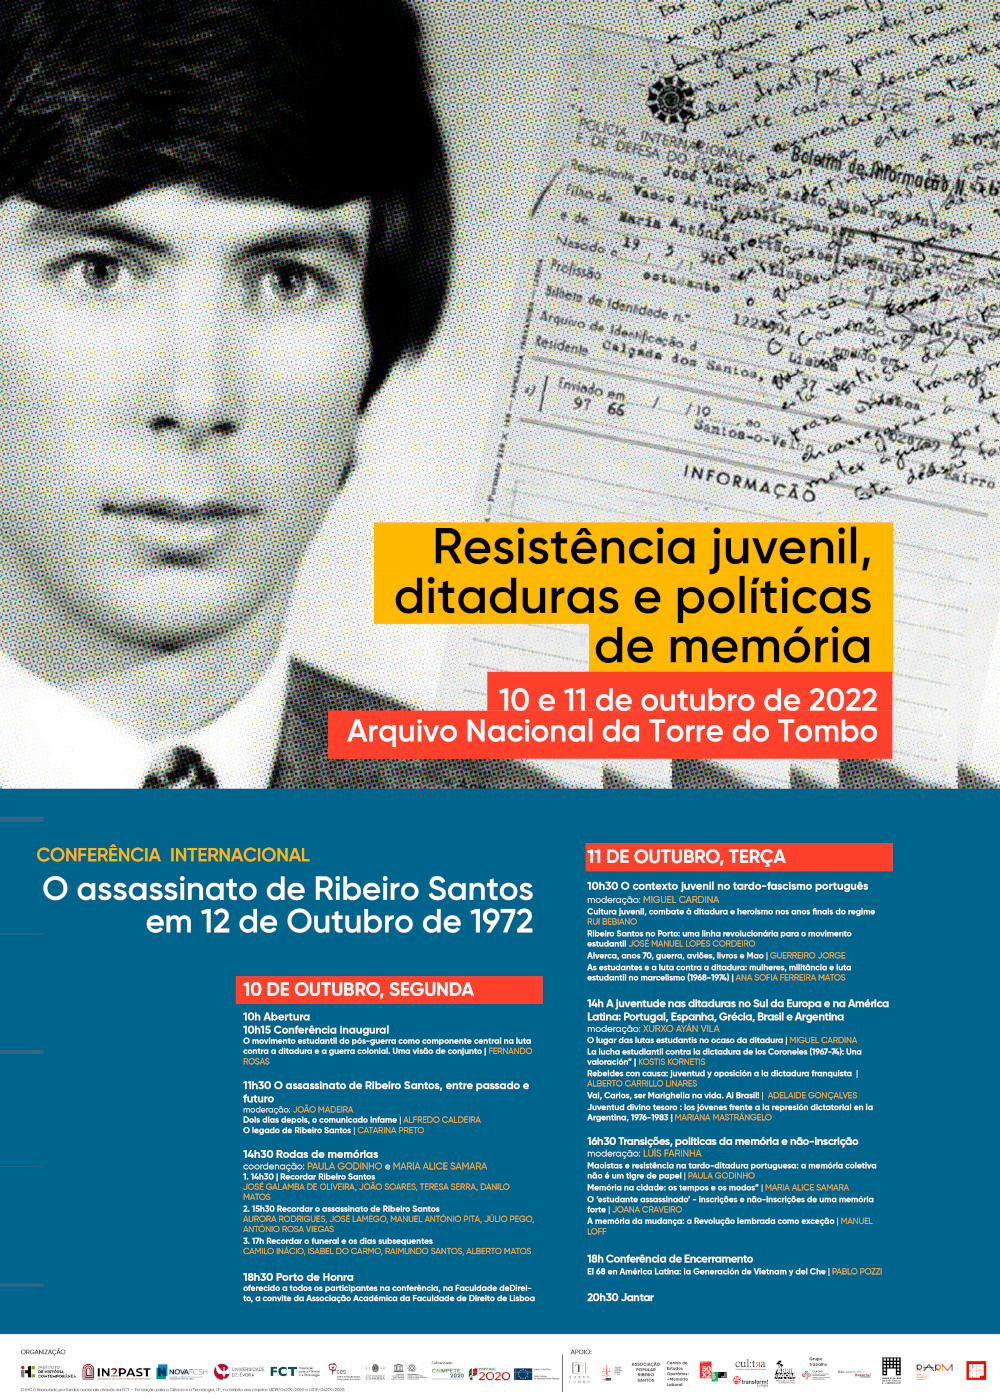 Youth resistance, dictatorships and politics of memory.  The assassination of Ribeiro Santos on October 12, 1972<span id="edit_40398"><script>$(function() { $('#edit_40398').load( "/myces/user/editobj.php?tipo=evento&id=40398" ); });</script></span>